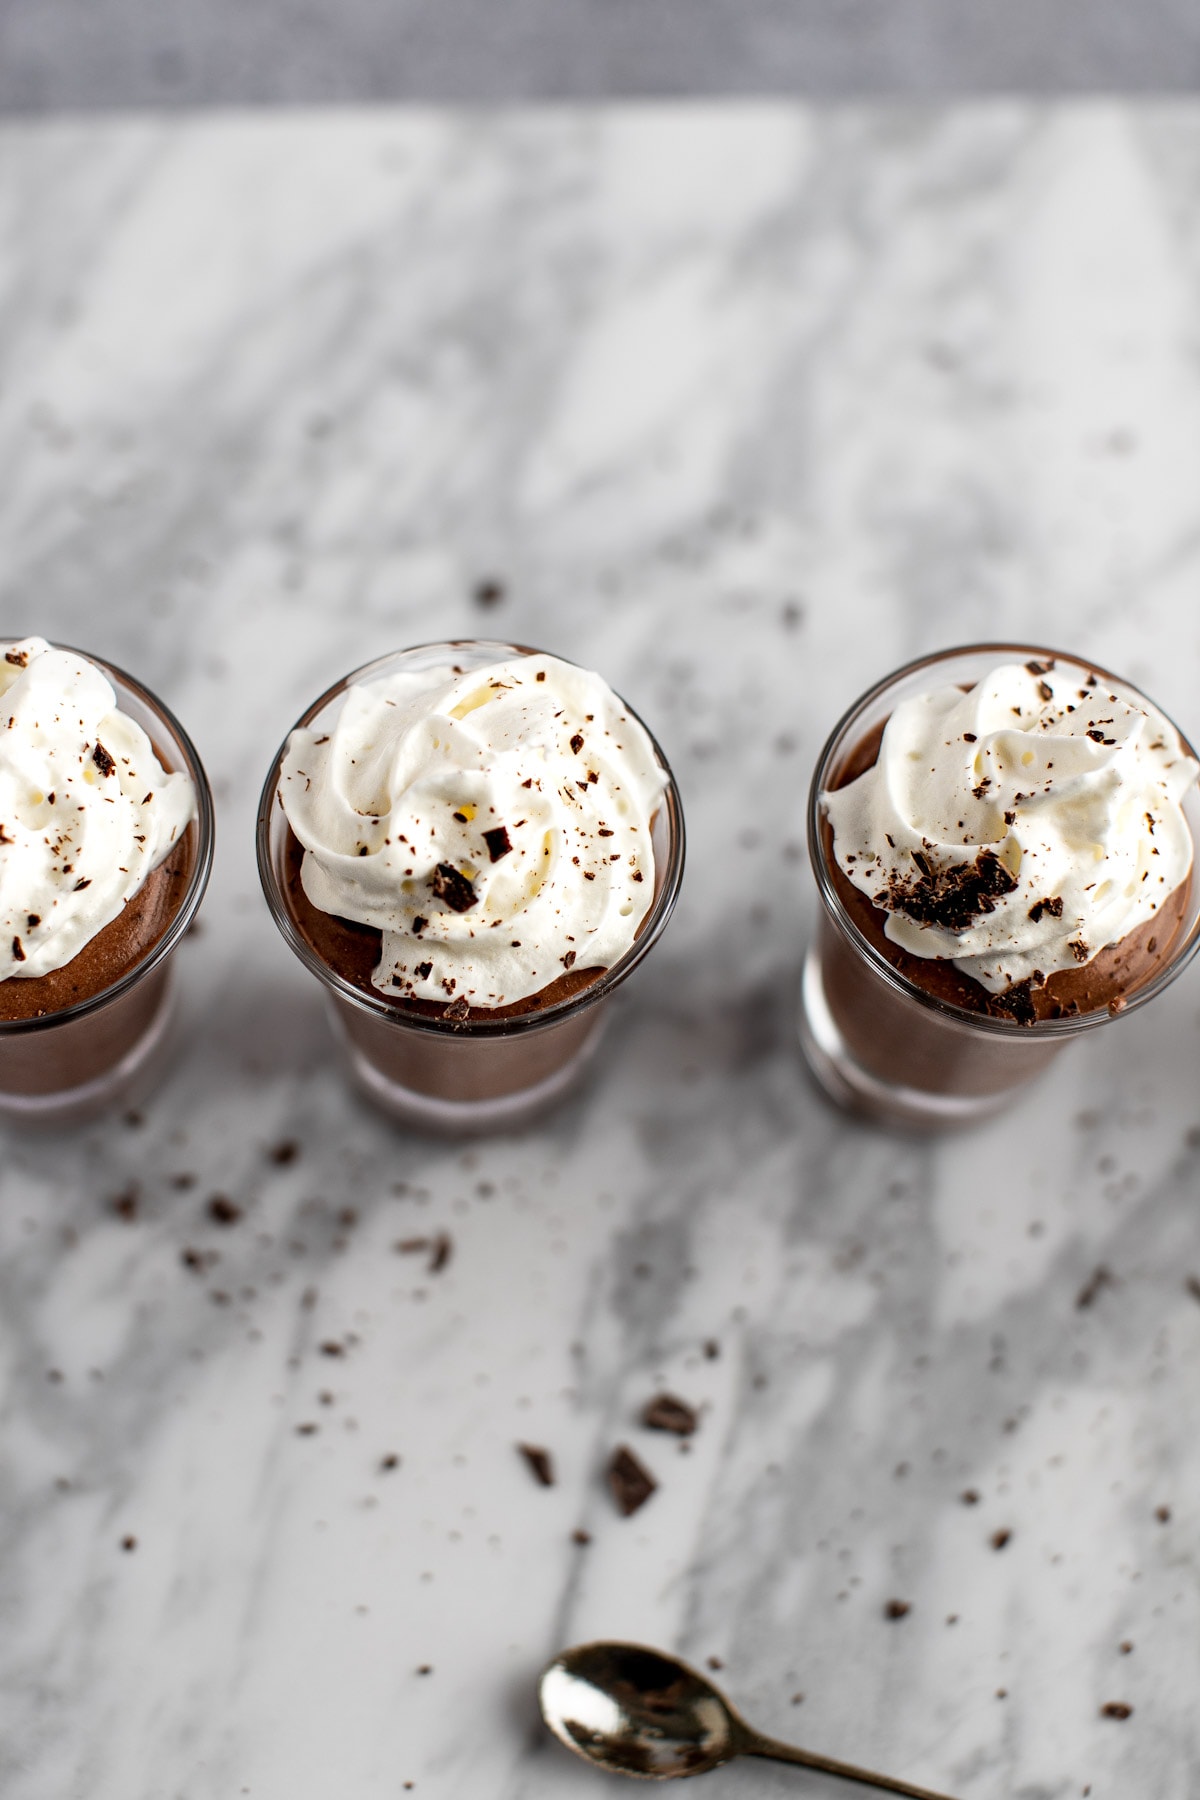 An overhead view of three rumchata pudding shots topped with whipped cream and chocolate shavings.